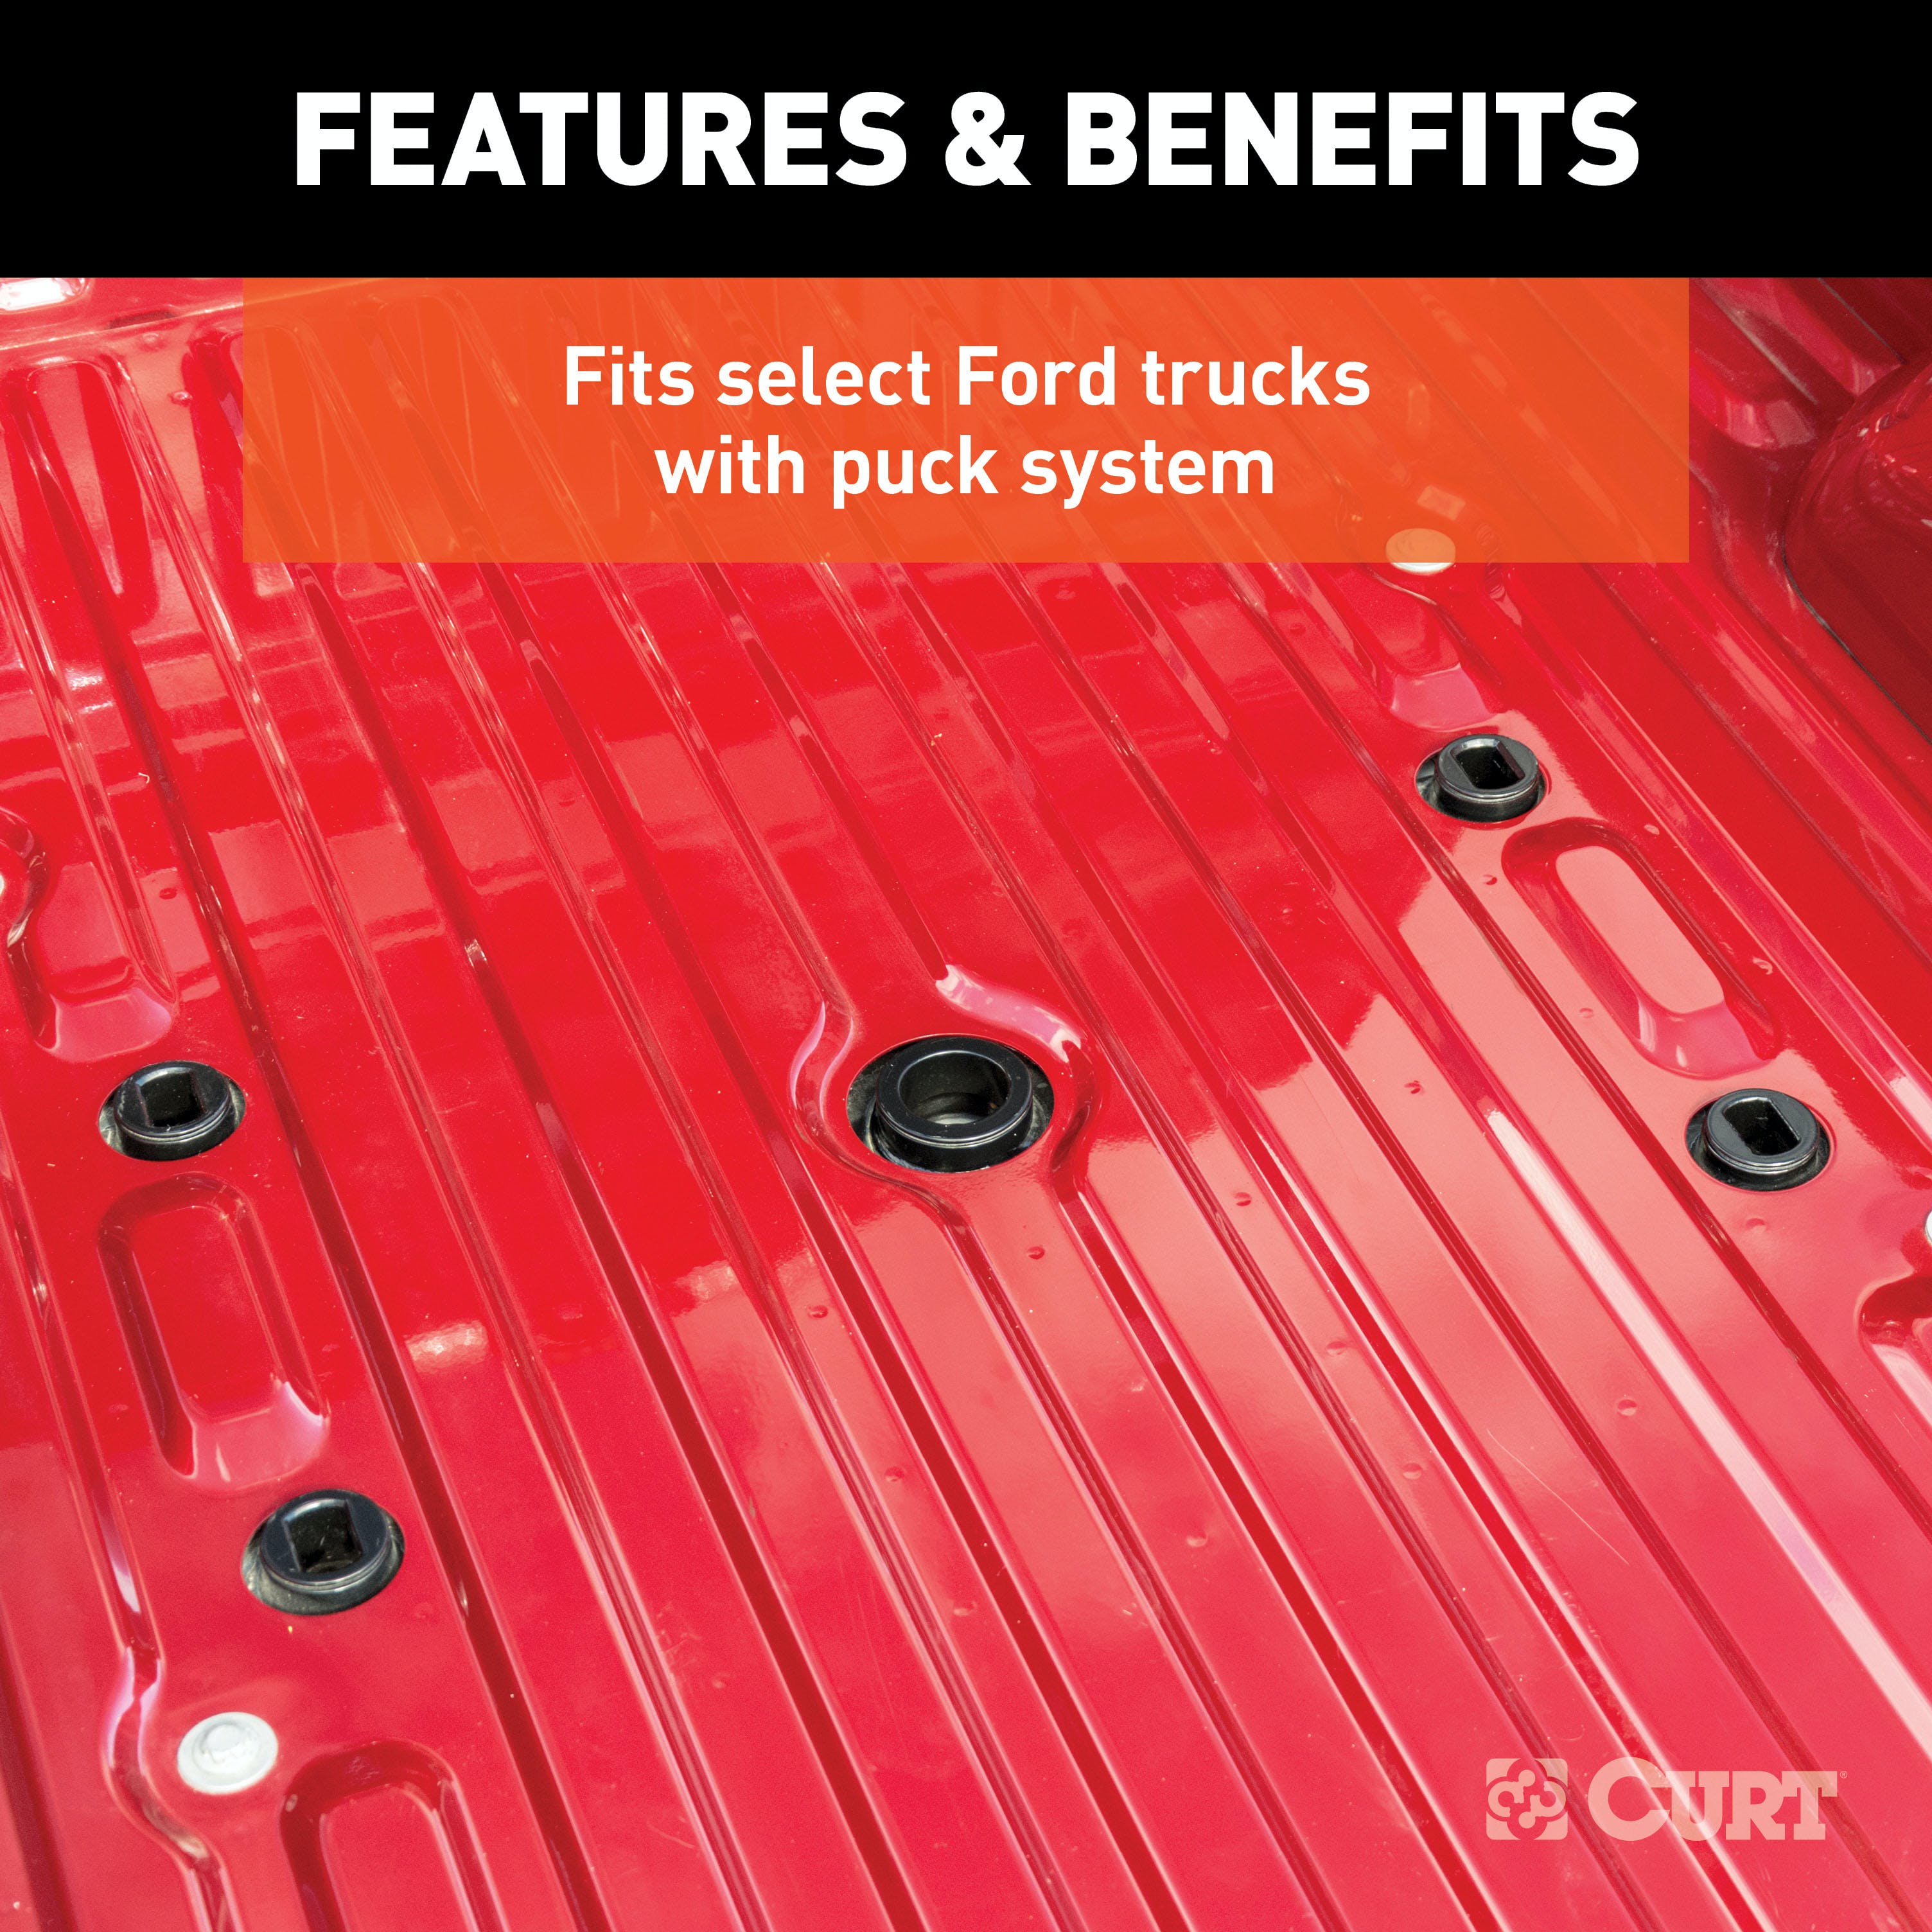 CURT 16674 E16 Sliding 5th Wheel Hitch, Select Ford F250, F350, F450, 6.75' Bed Puck System